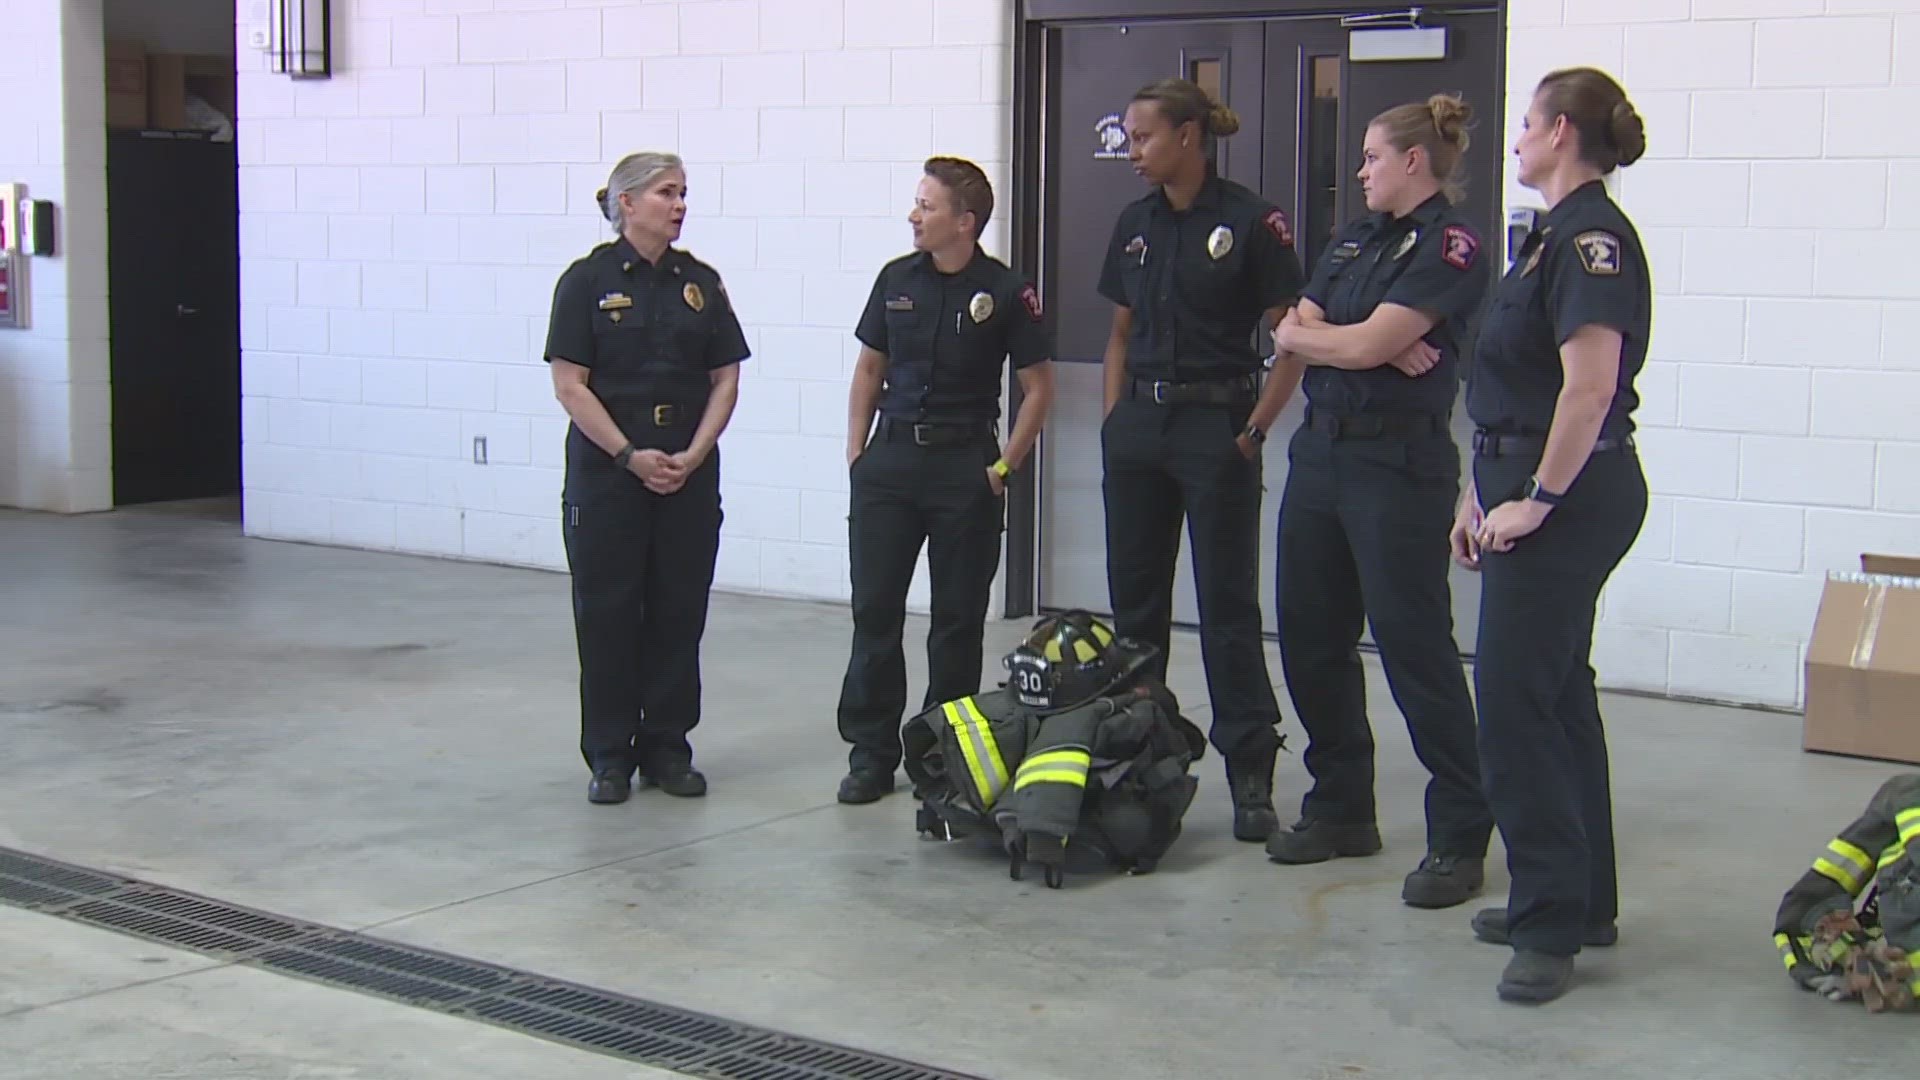 The women in the Denver Fire Department are proving they can do anything their male counterparts can, but the fight to get there hasn't been easy.